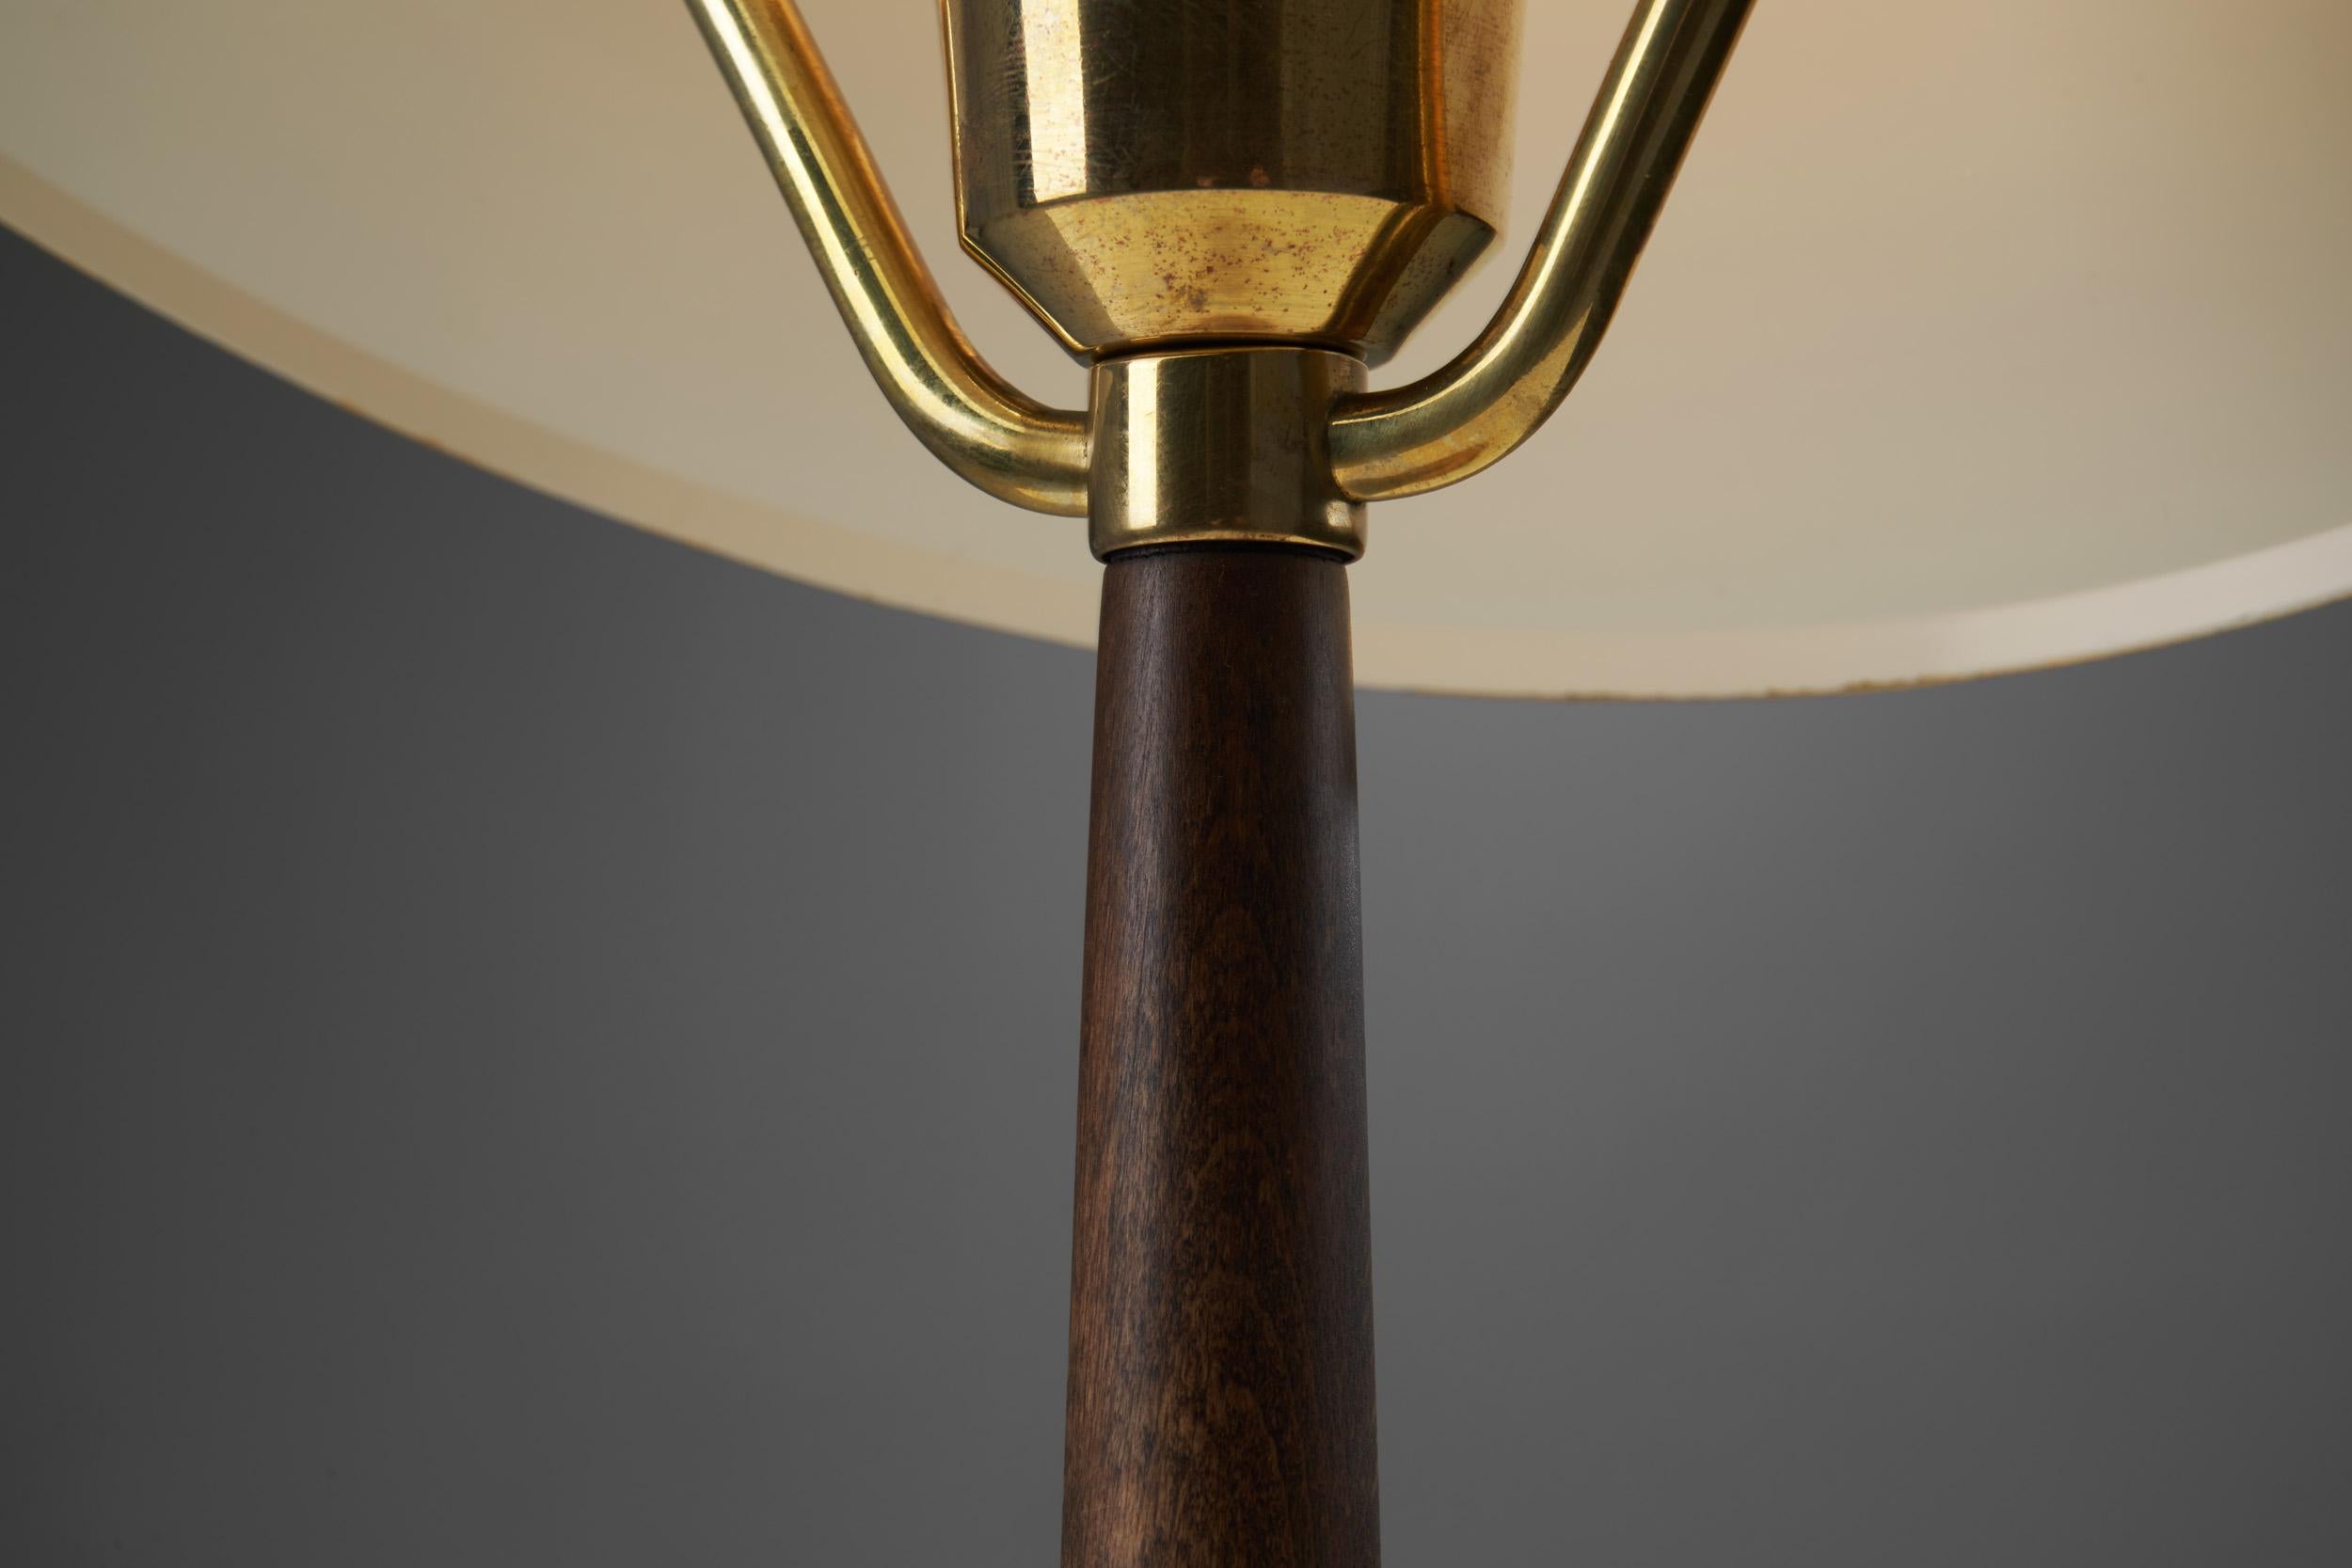 AB E. Hansson & Co. Brass Table Lamp with Adjustable Shade, Sweden 1950s For Sale 6